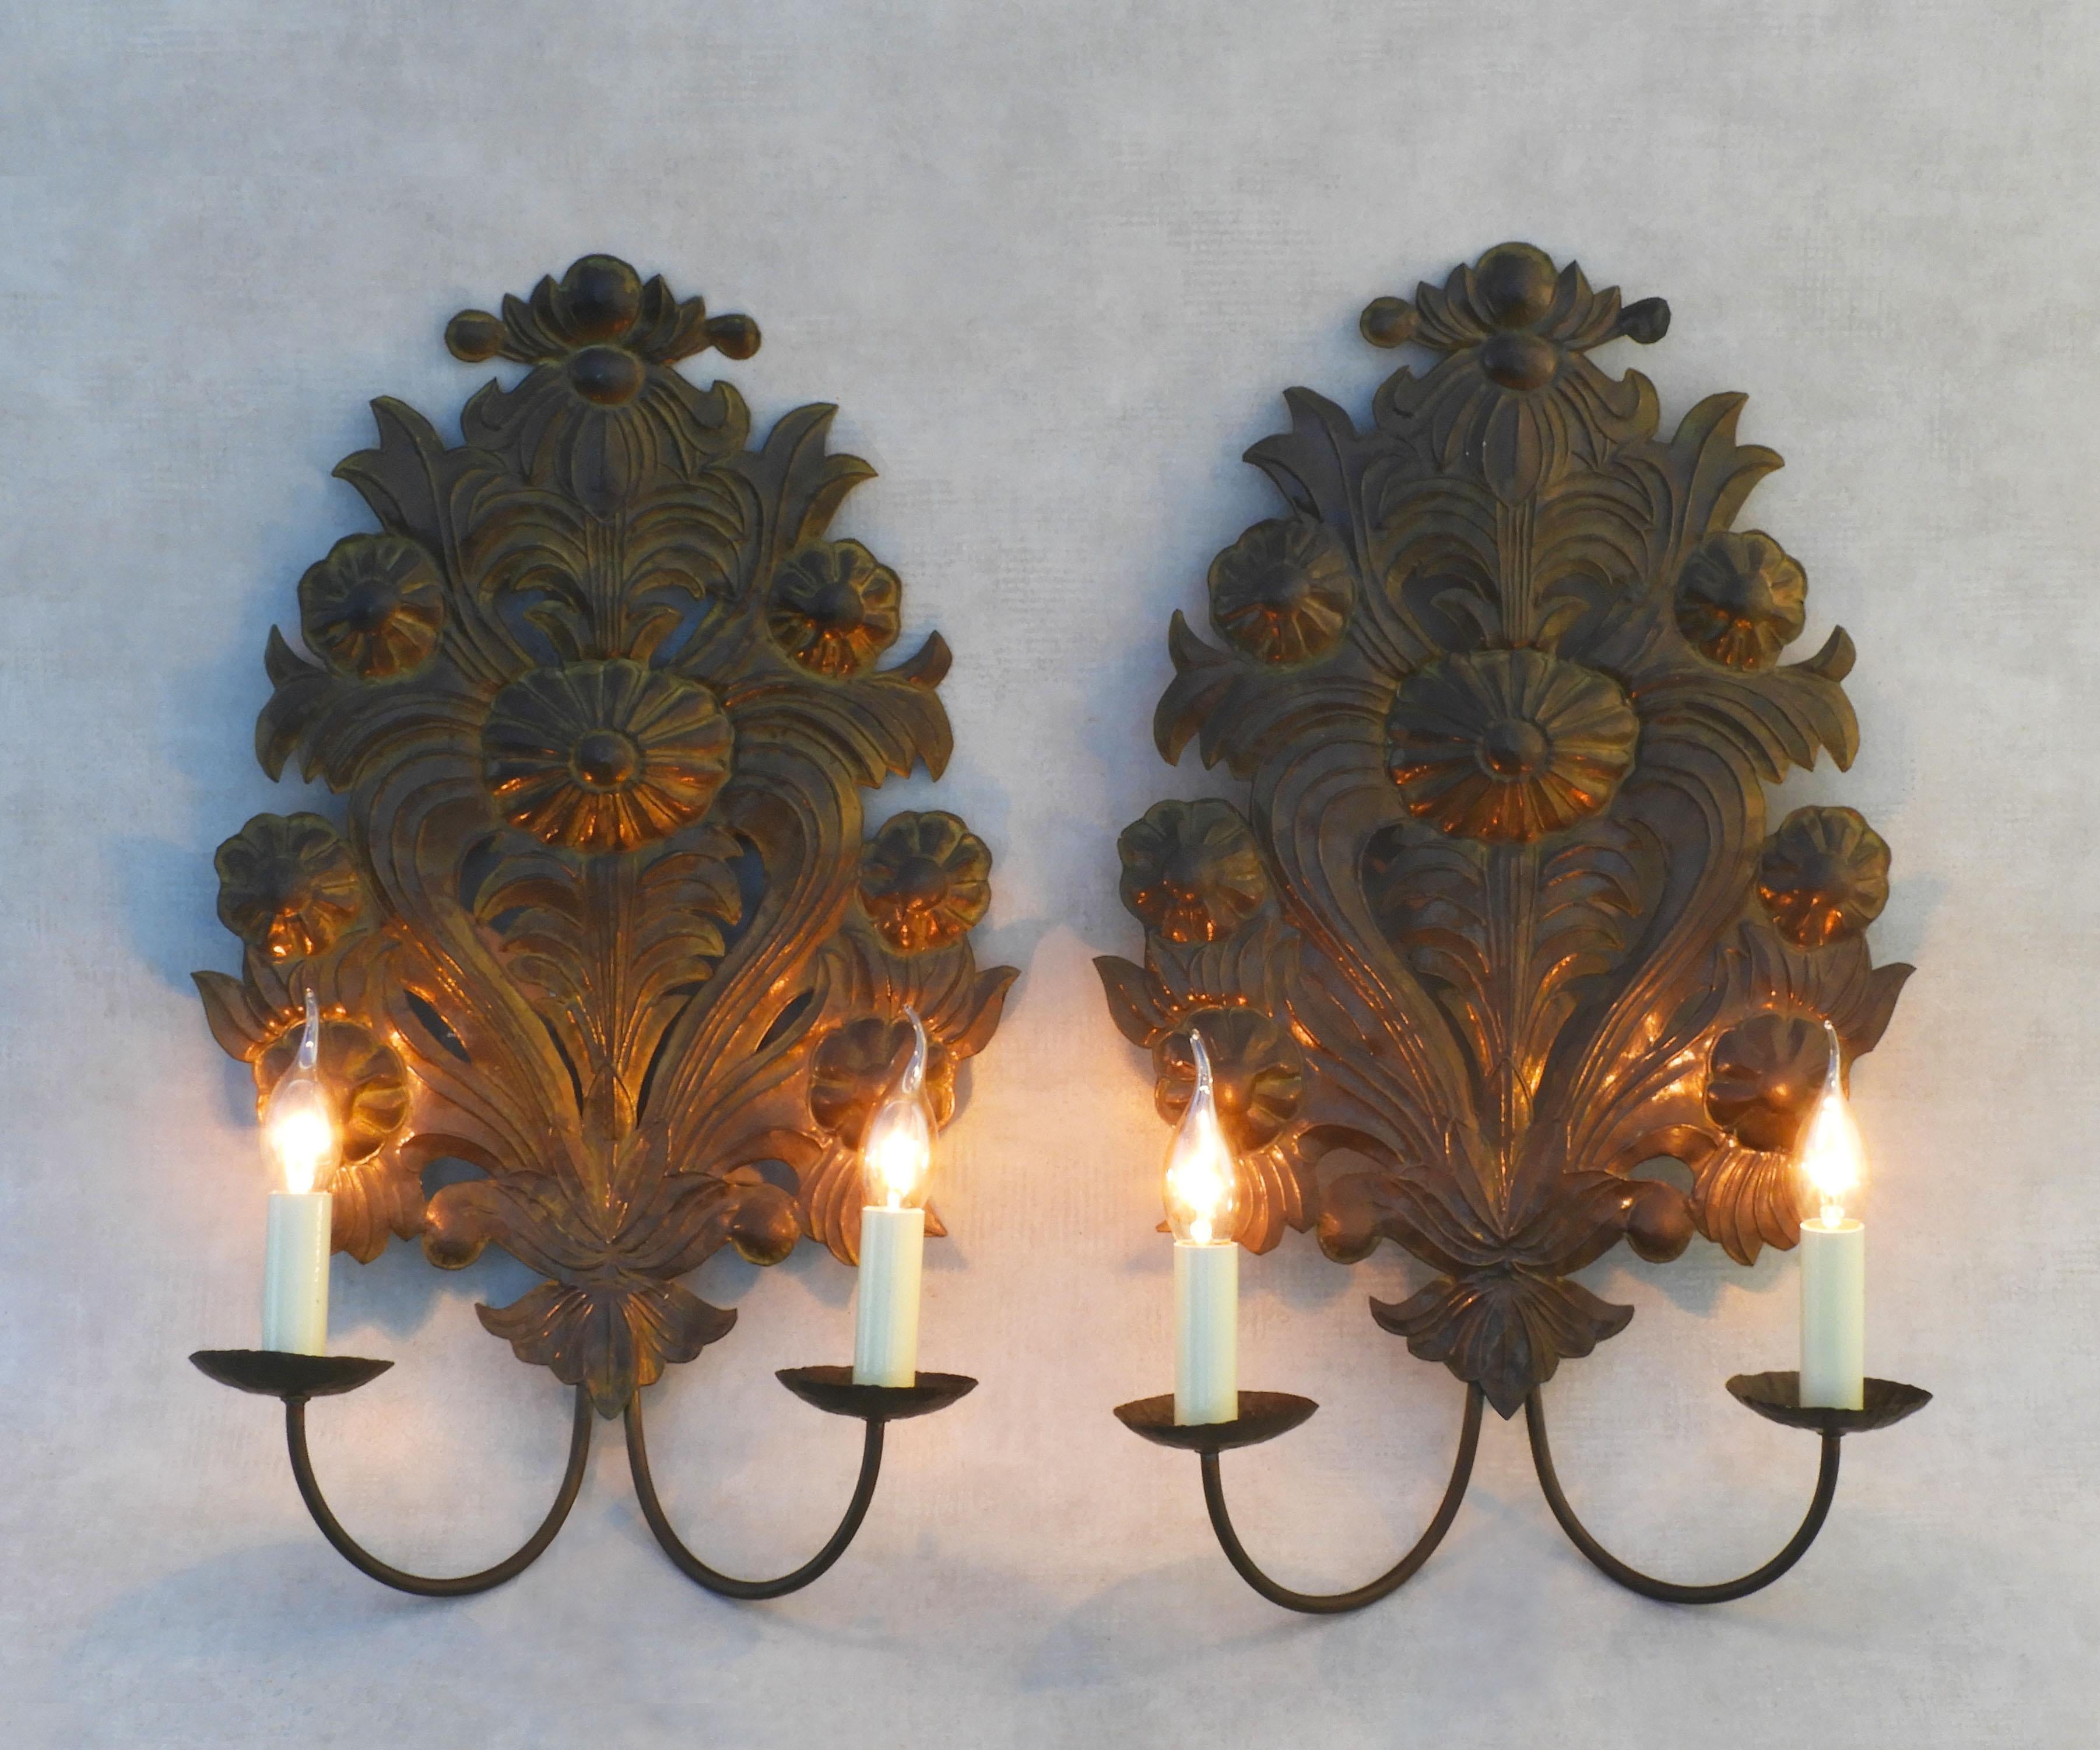 A pair of large, tôleware repoussé wall light sconces from early 20th Century France. 
Two ‘grand appliqués’ in hand-embossed brass tôle, each with two faux candlelights. More recently converted for electricity, these sconces would have been